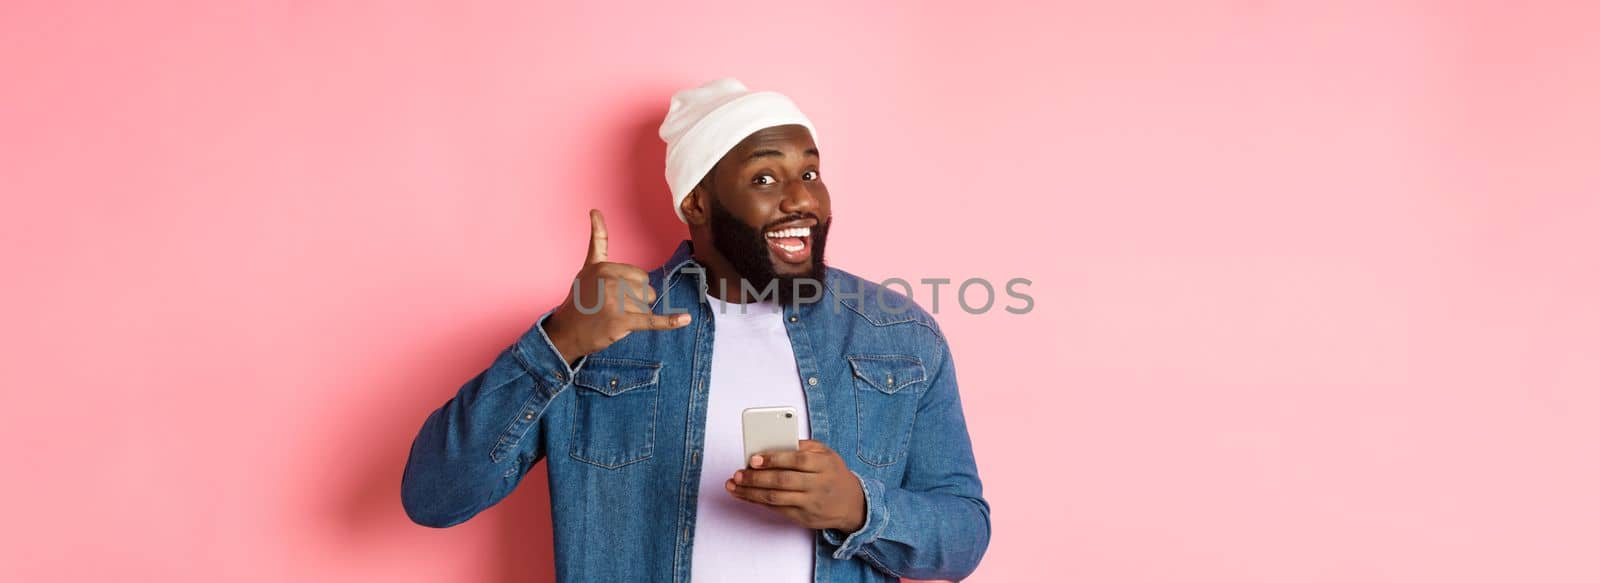 Happy Black man showing call me sign, making phone gesture and smiling, holding smartphone, standing in beanie and denim shirt over pink background.